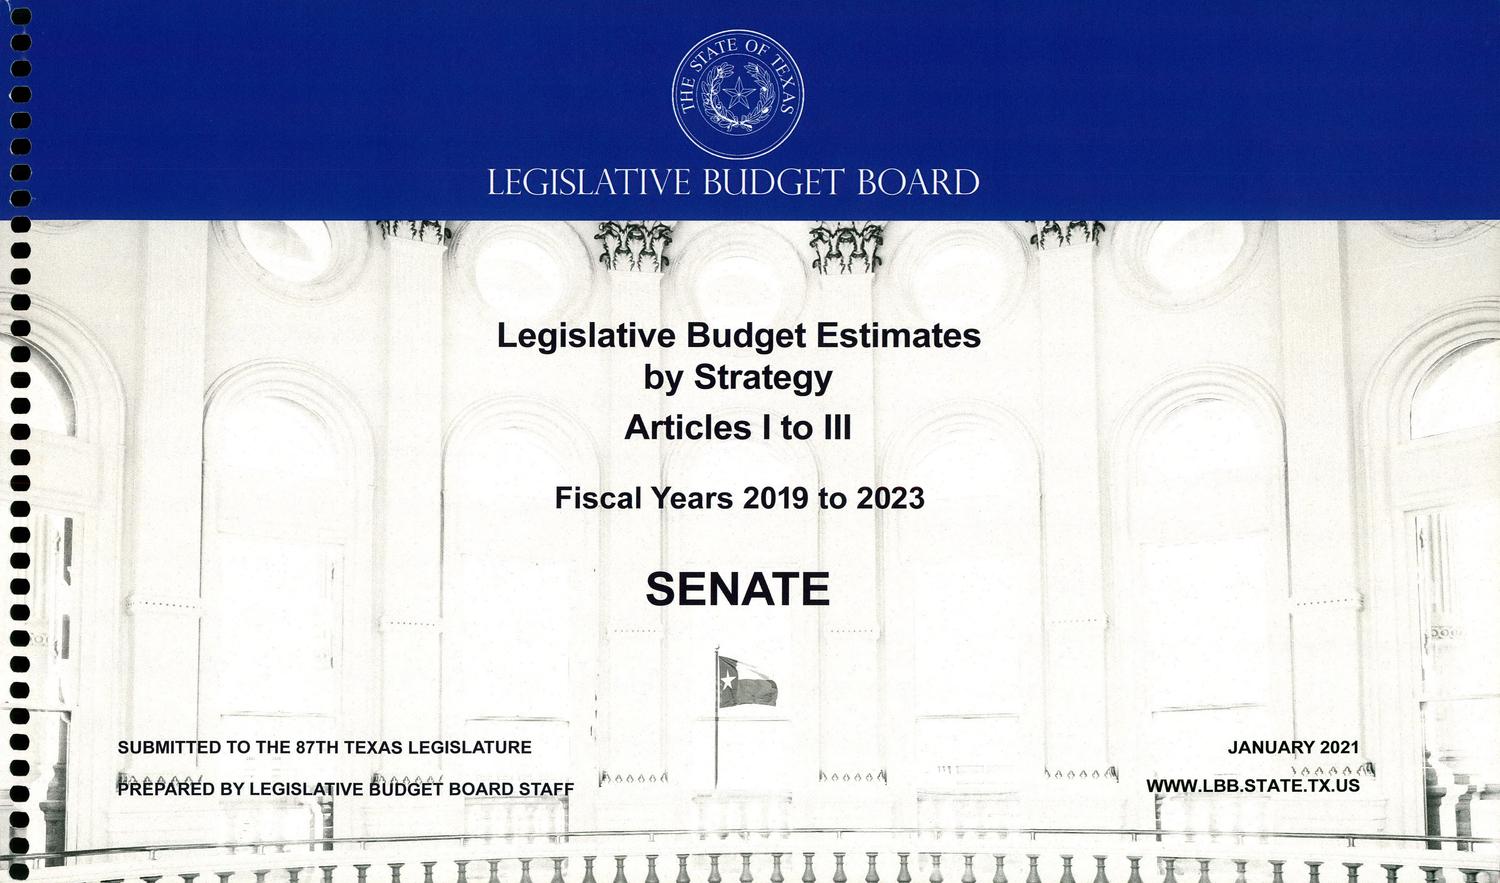 Texas Senate Legislative Budget Estimates by Strategy: Fiscal Years 2019 to 2023, Articles I-III
                                                
                                                    FRONT COVER
                                                